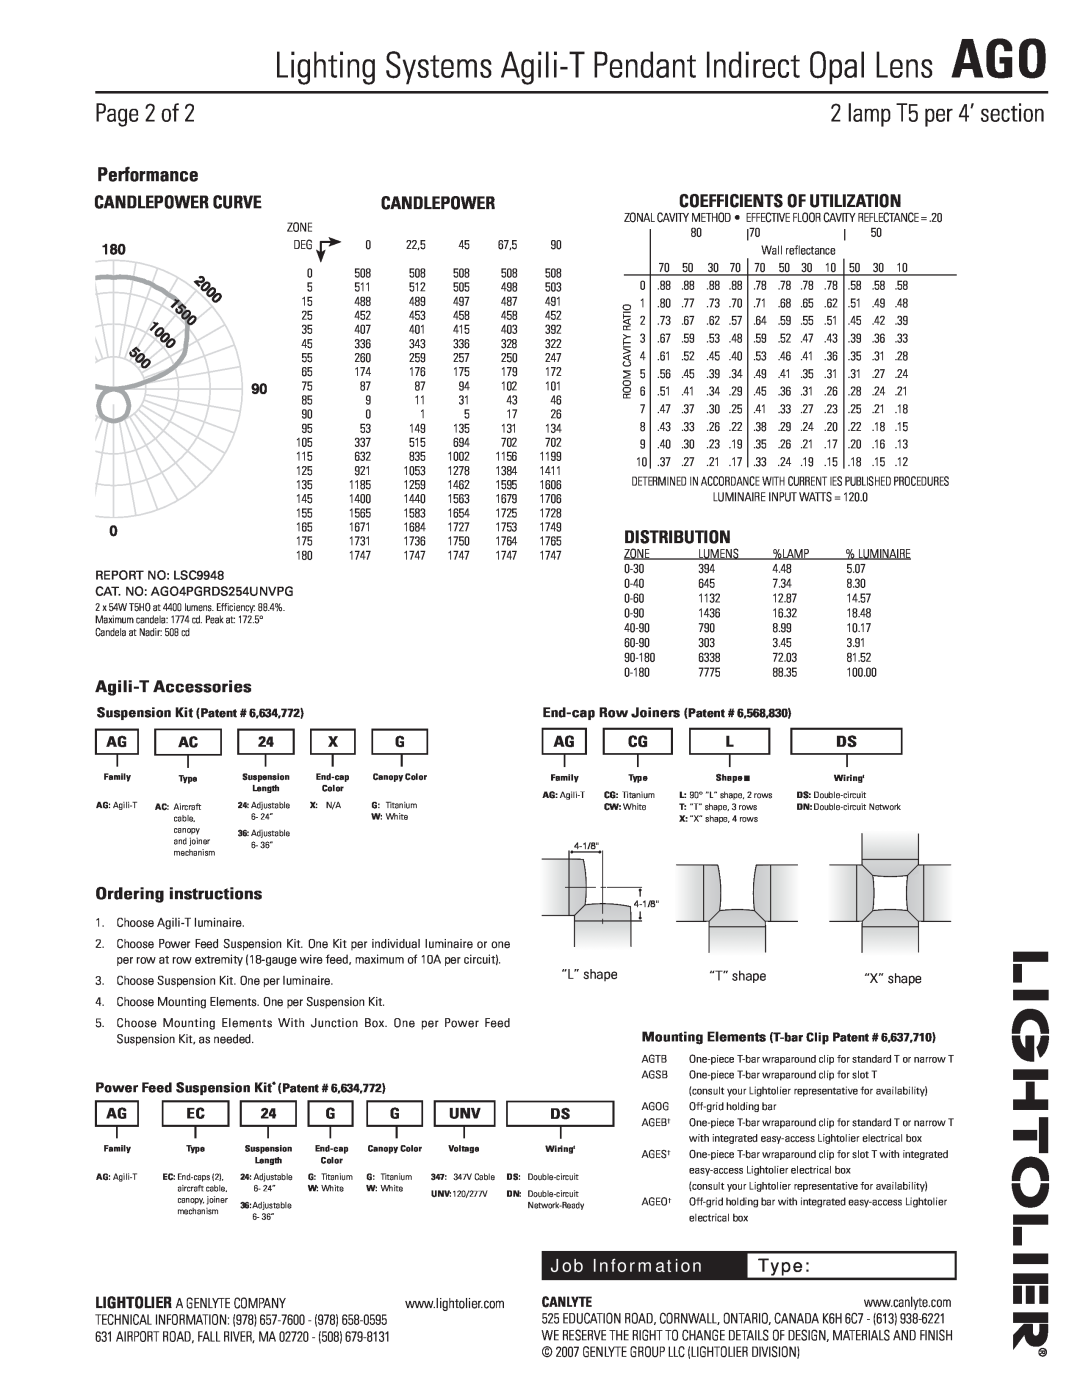 Lightolier AGO Page 2 of, Performance, Candlepower Curve, Distribution, Agili-TAccessories, Ordering instructions, Type 